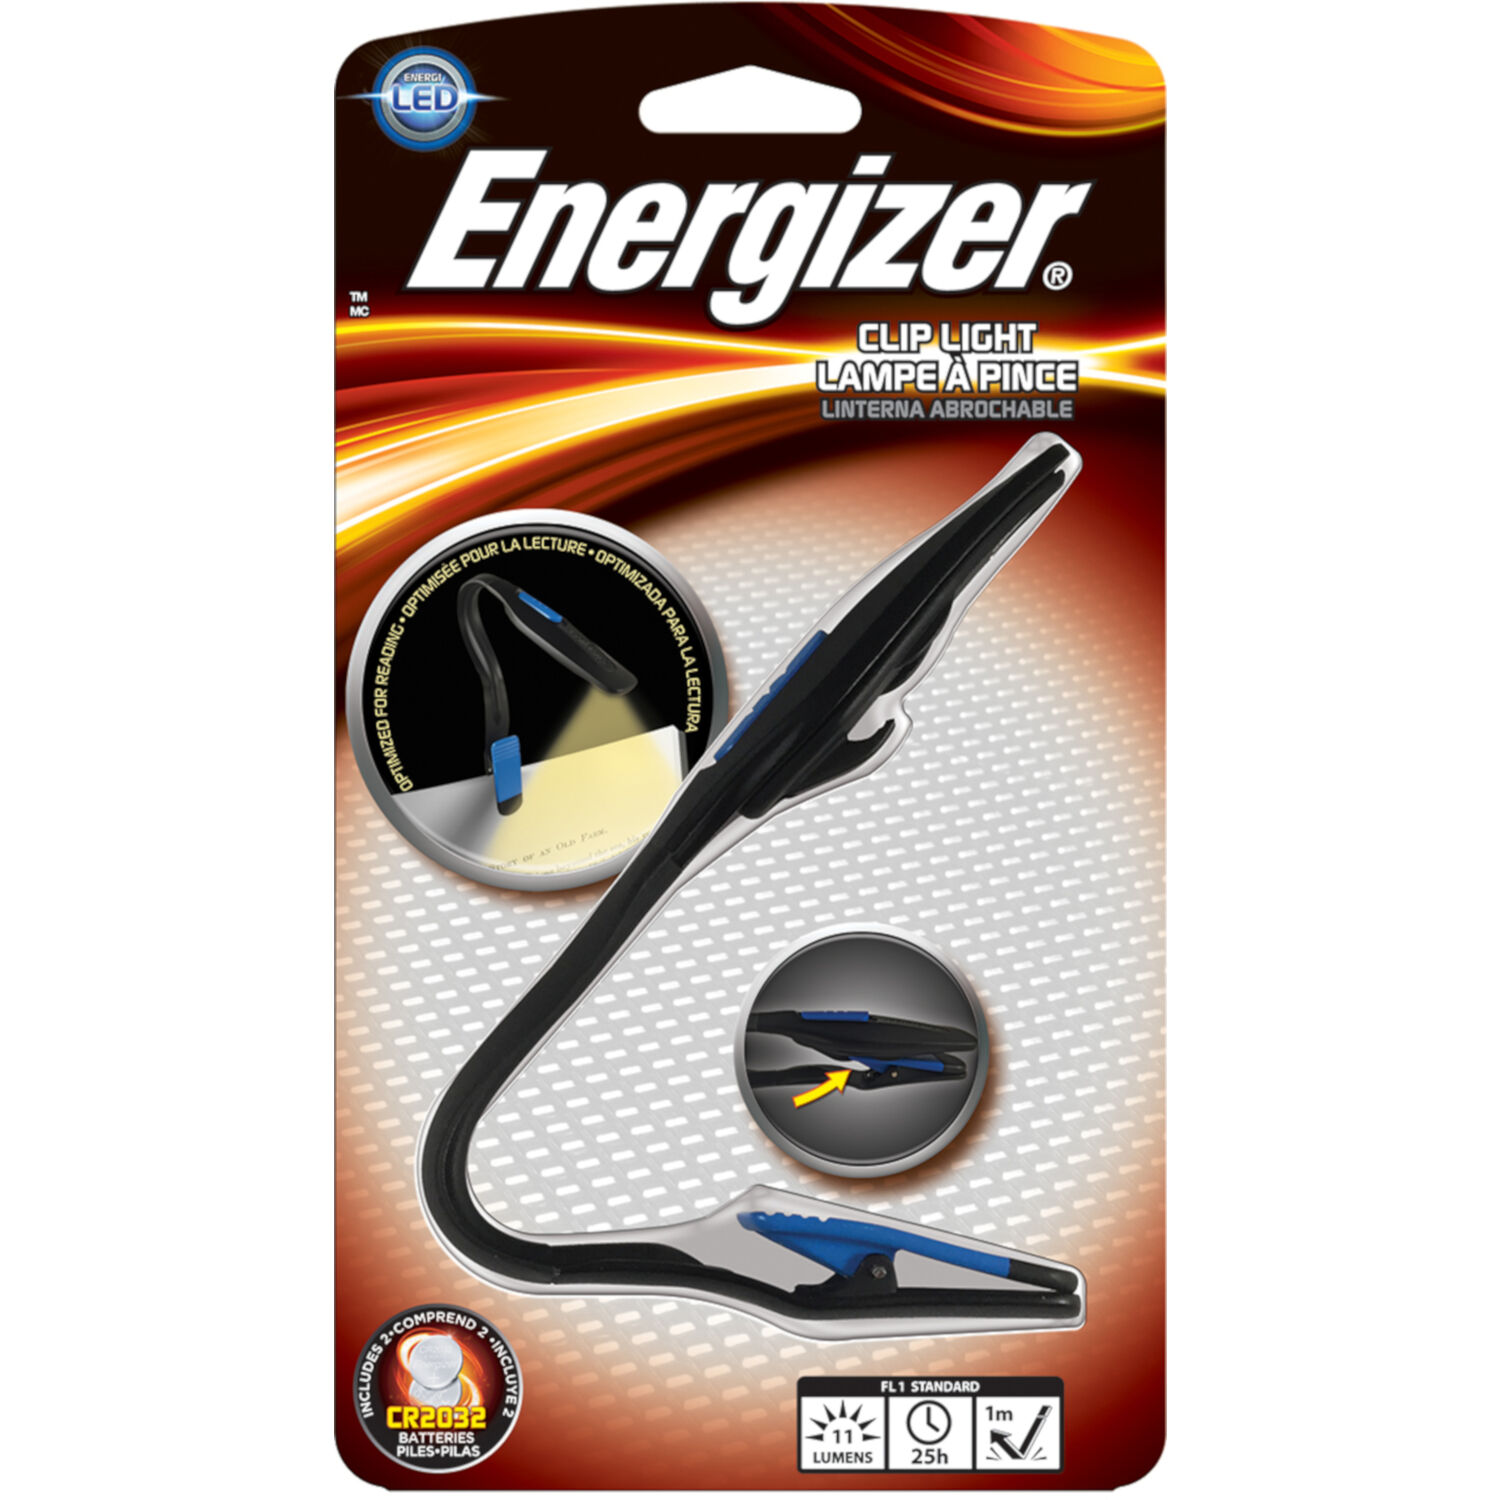 Energizer 638668 Magnet Small Light with 2 x CR2032 Speciality Batteries 